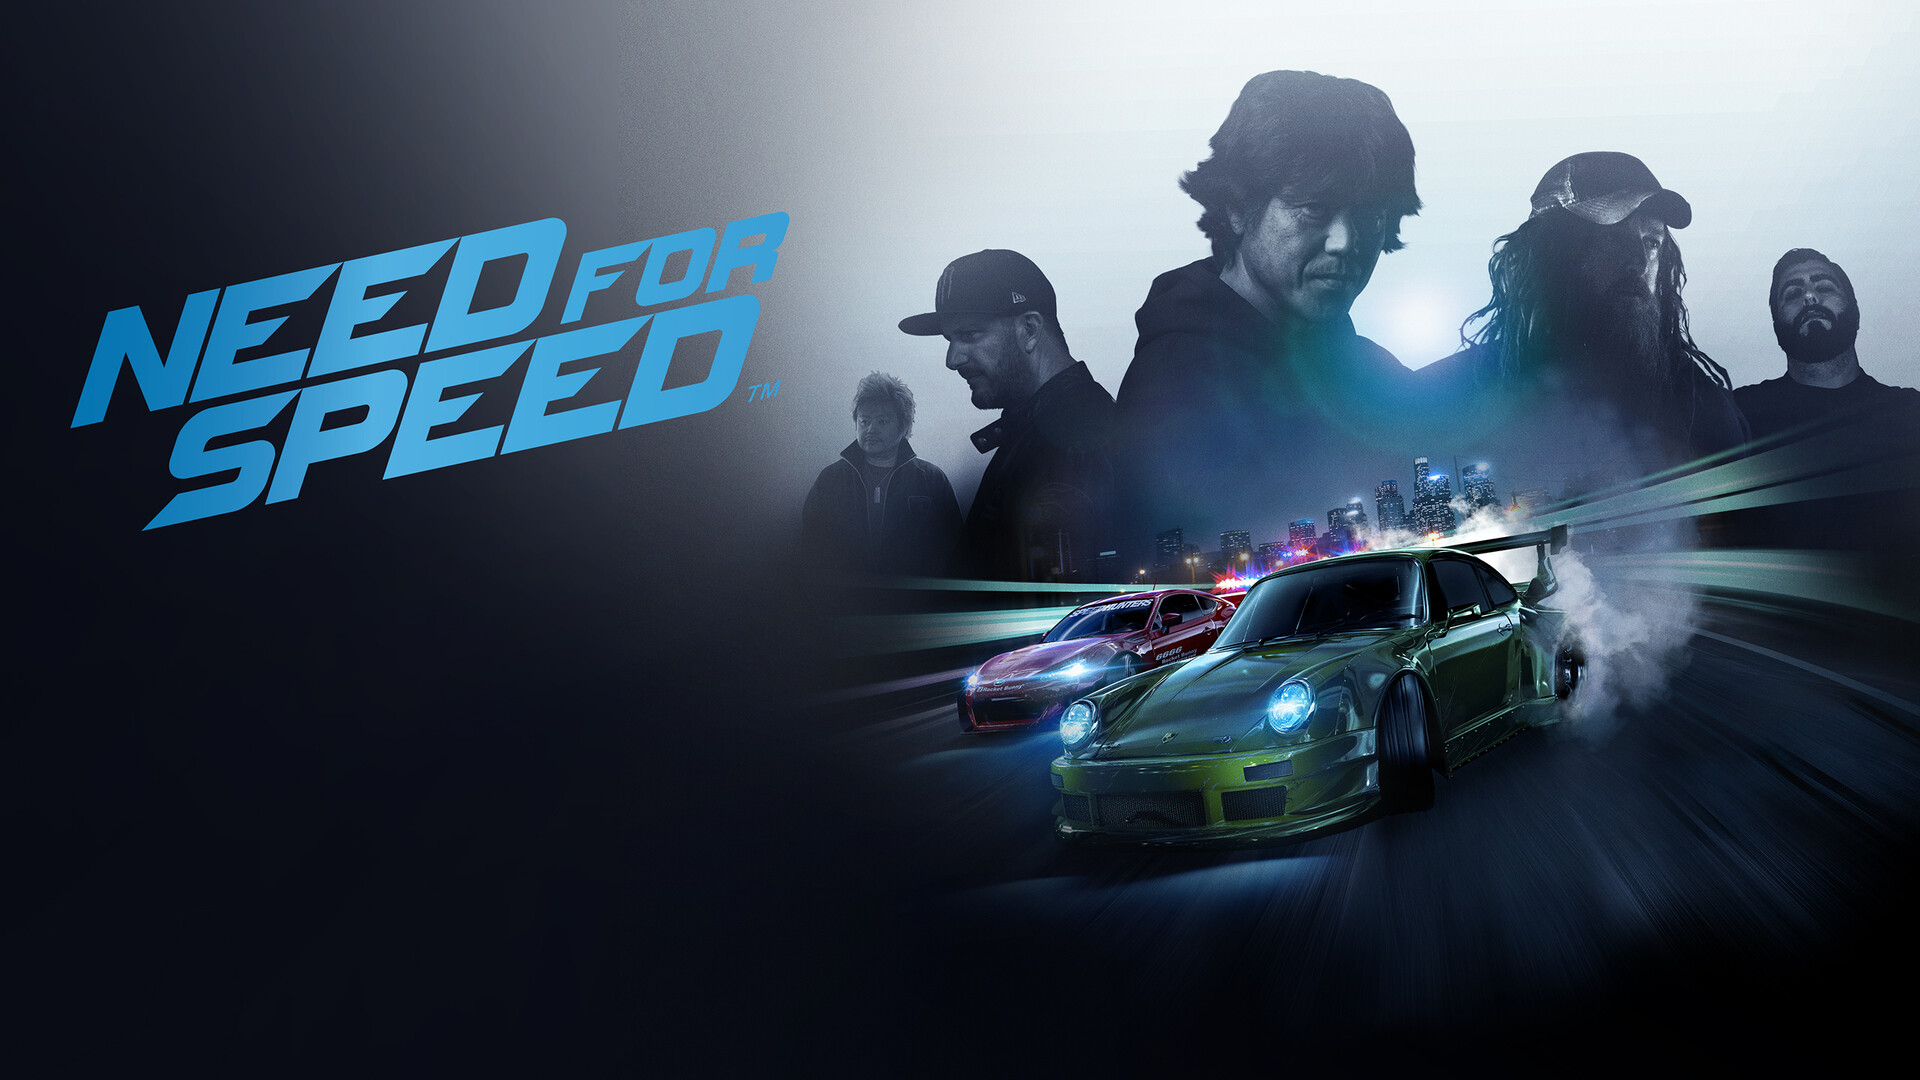 Need for Speed: A single-player and multiplayer first-person and third-person racing game. 1920x1080 Full HD Wallpaper.